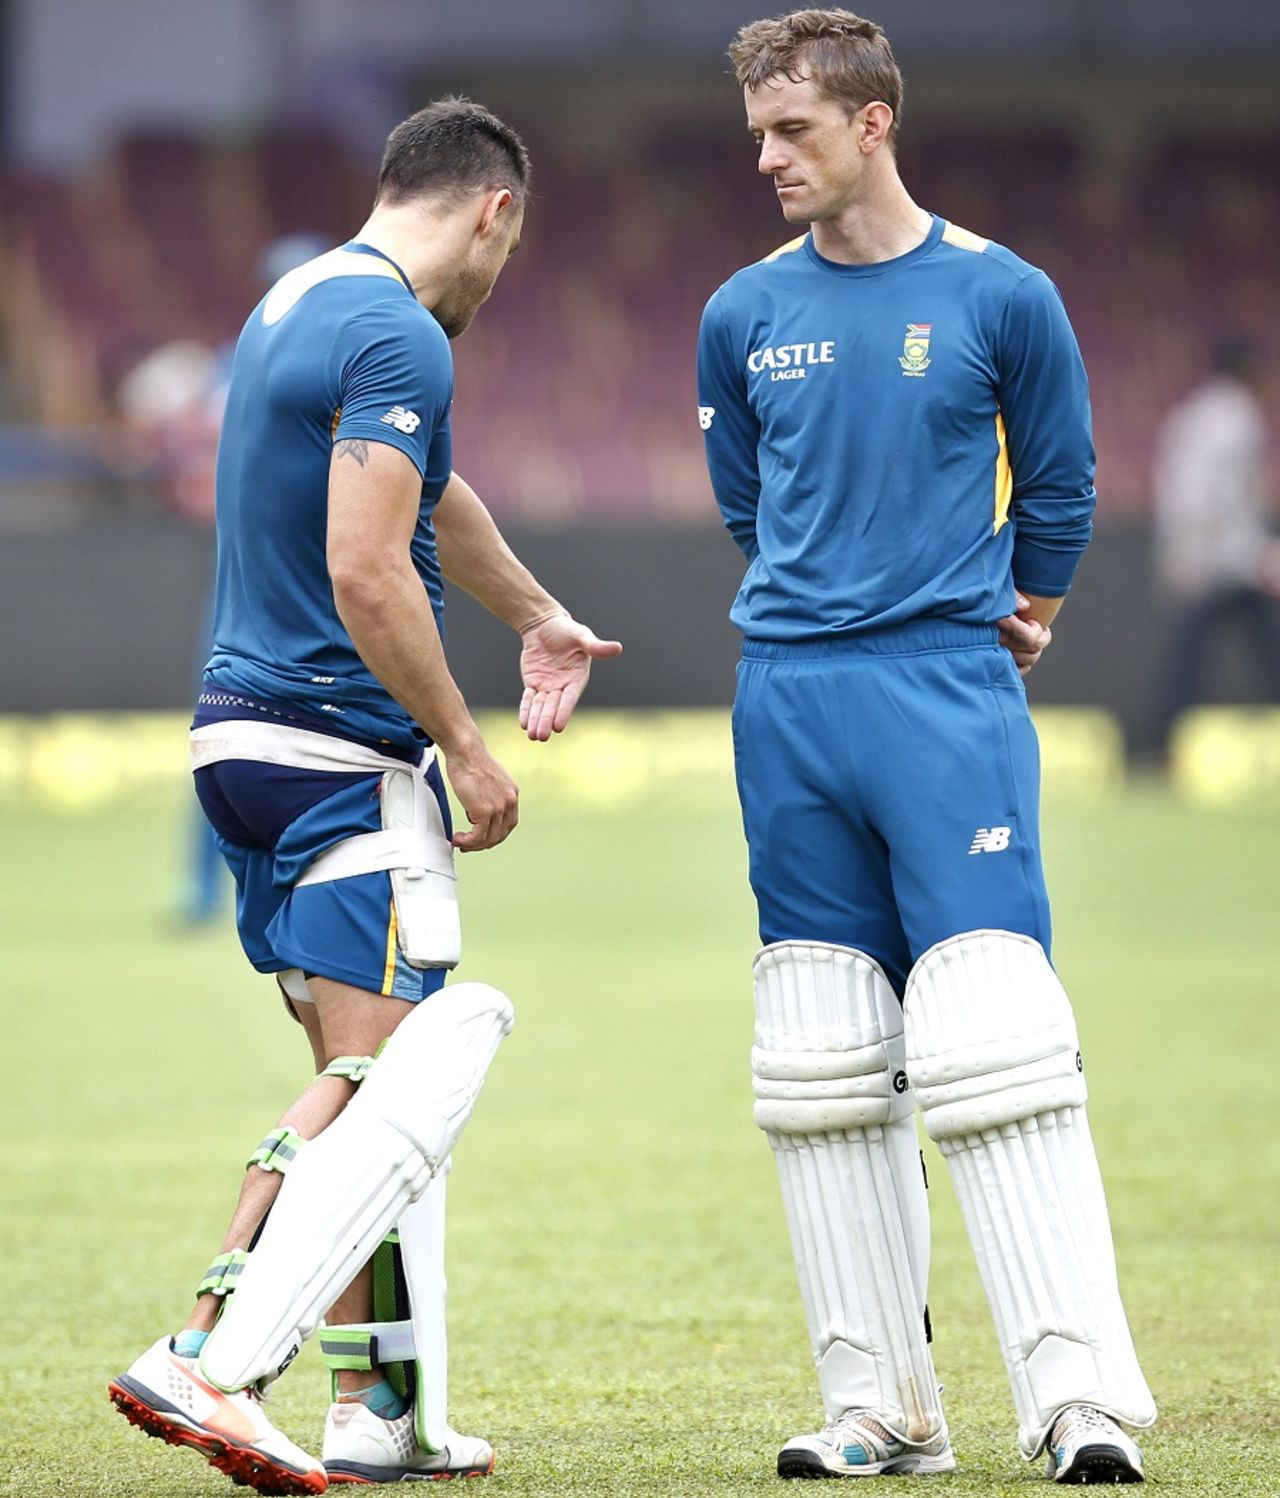 That's how you do it: Faf du Plessis passes on some advice to Dane Vilas during training, Bangalore, November 13, 2015